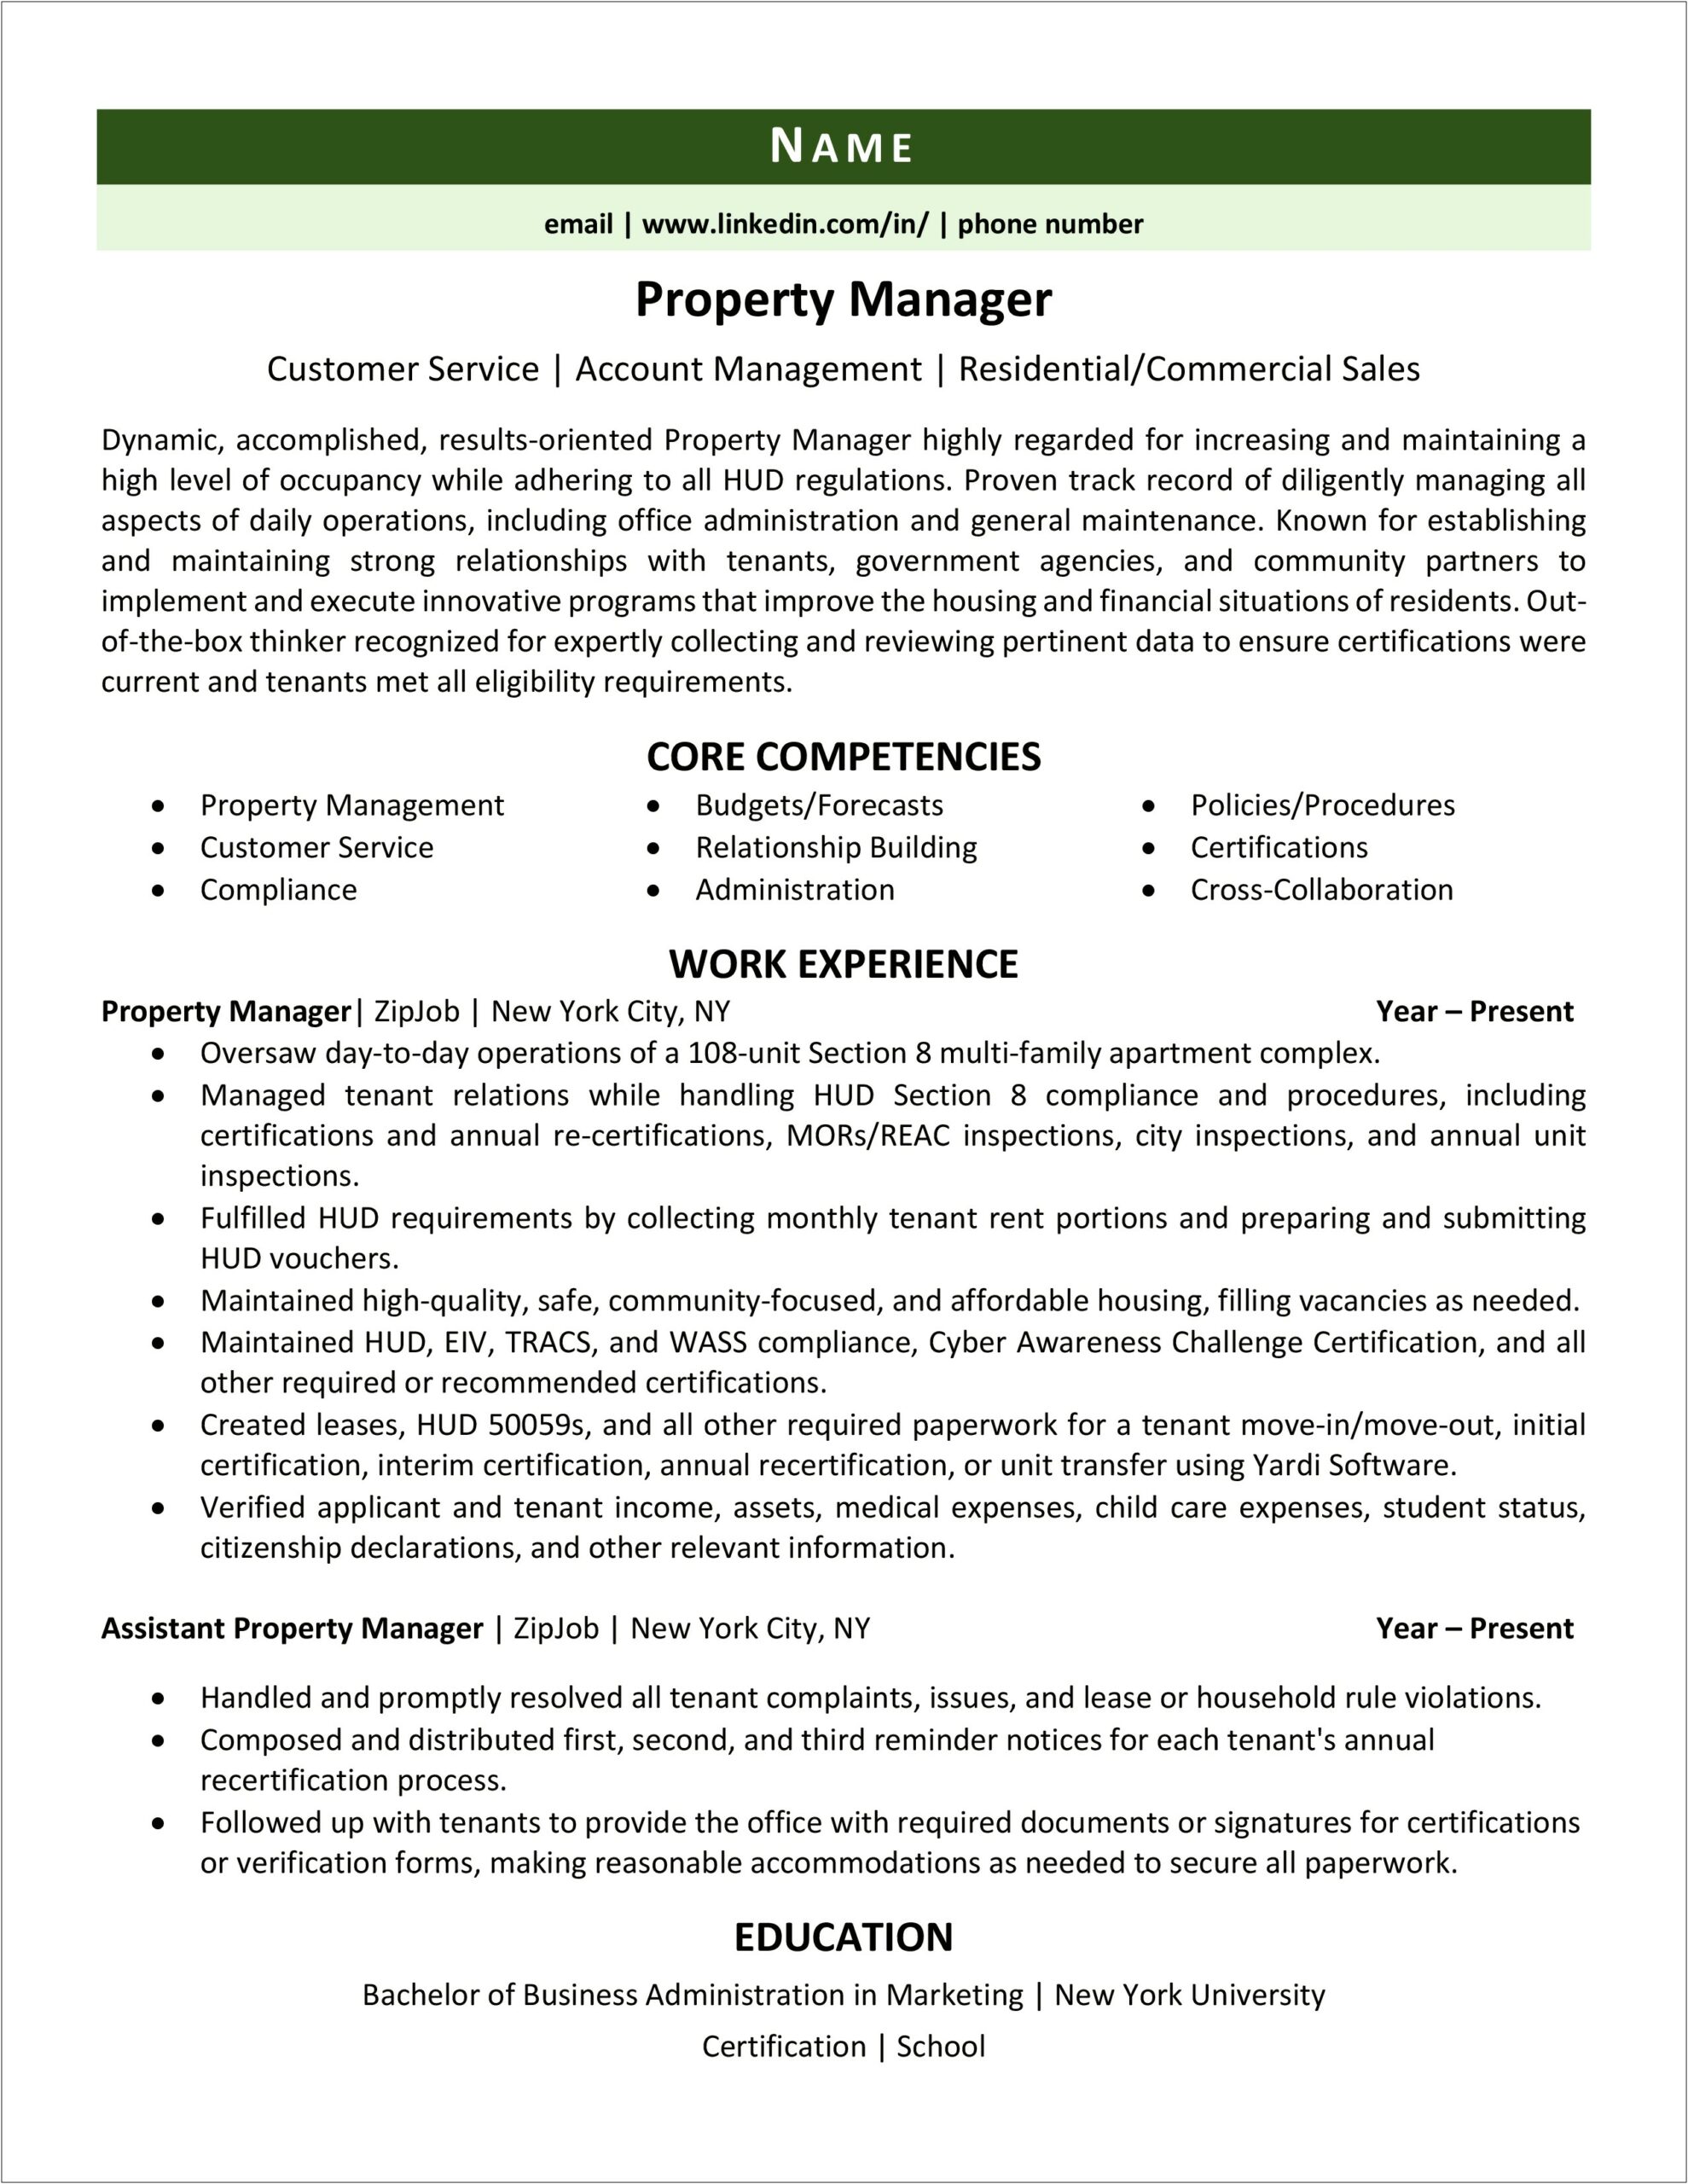 Resume Search For Propery Management Long Island